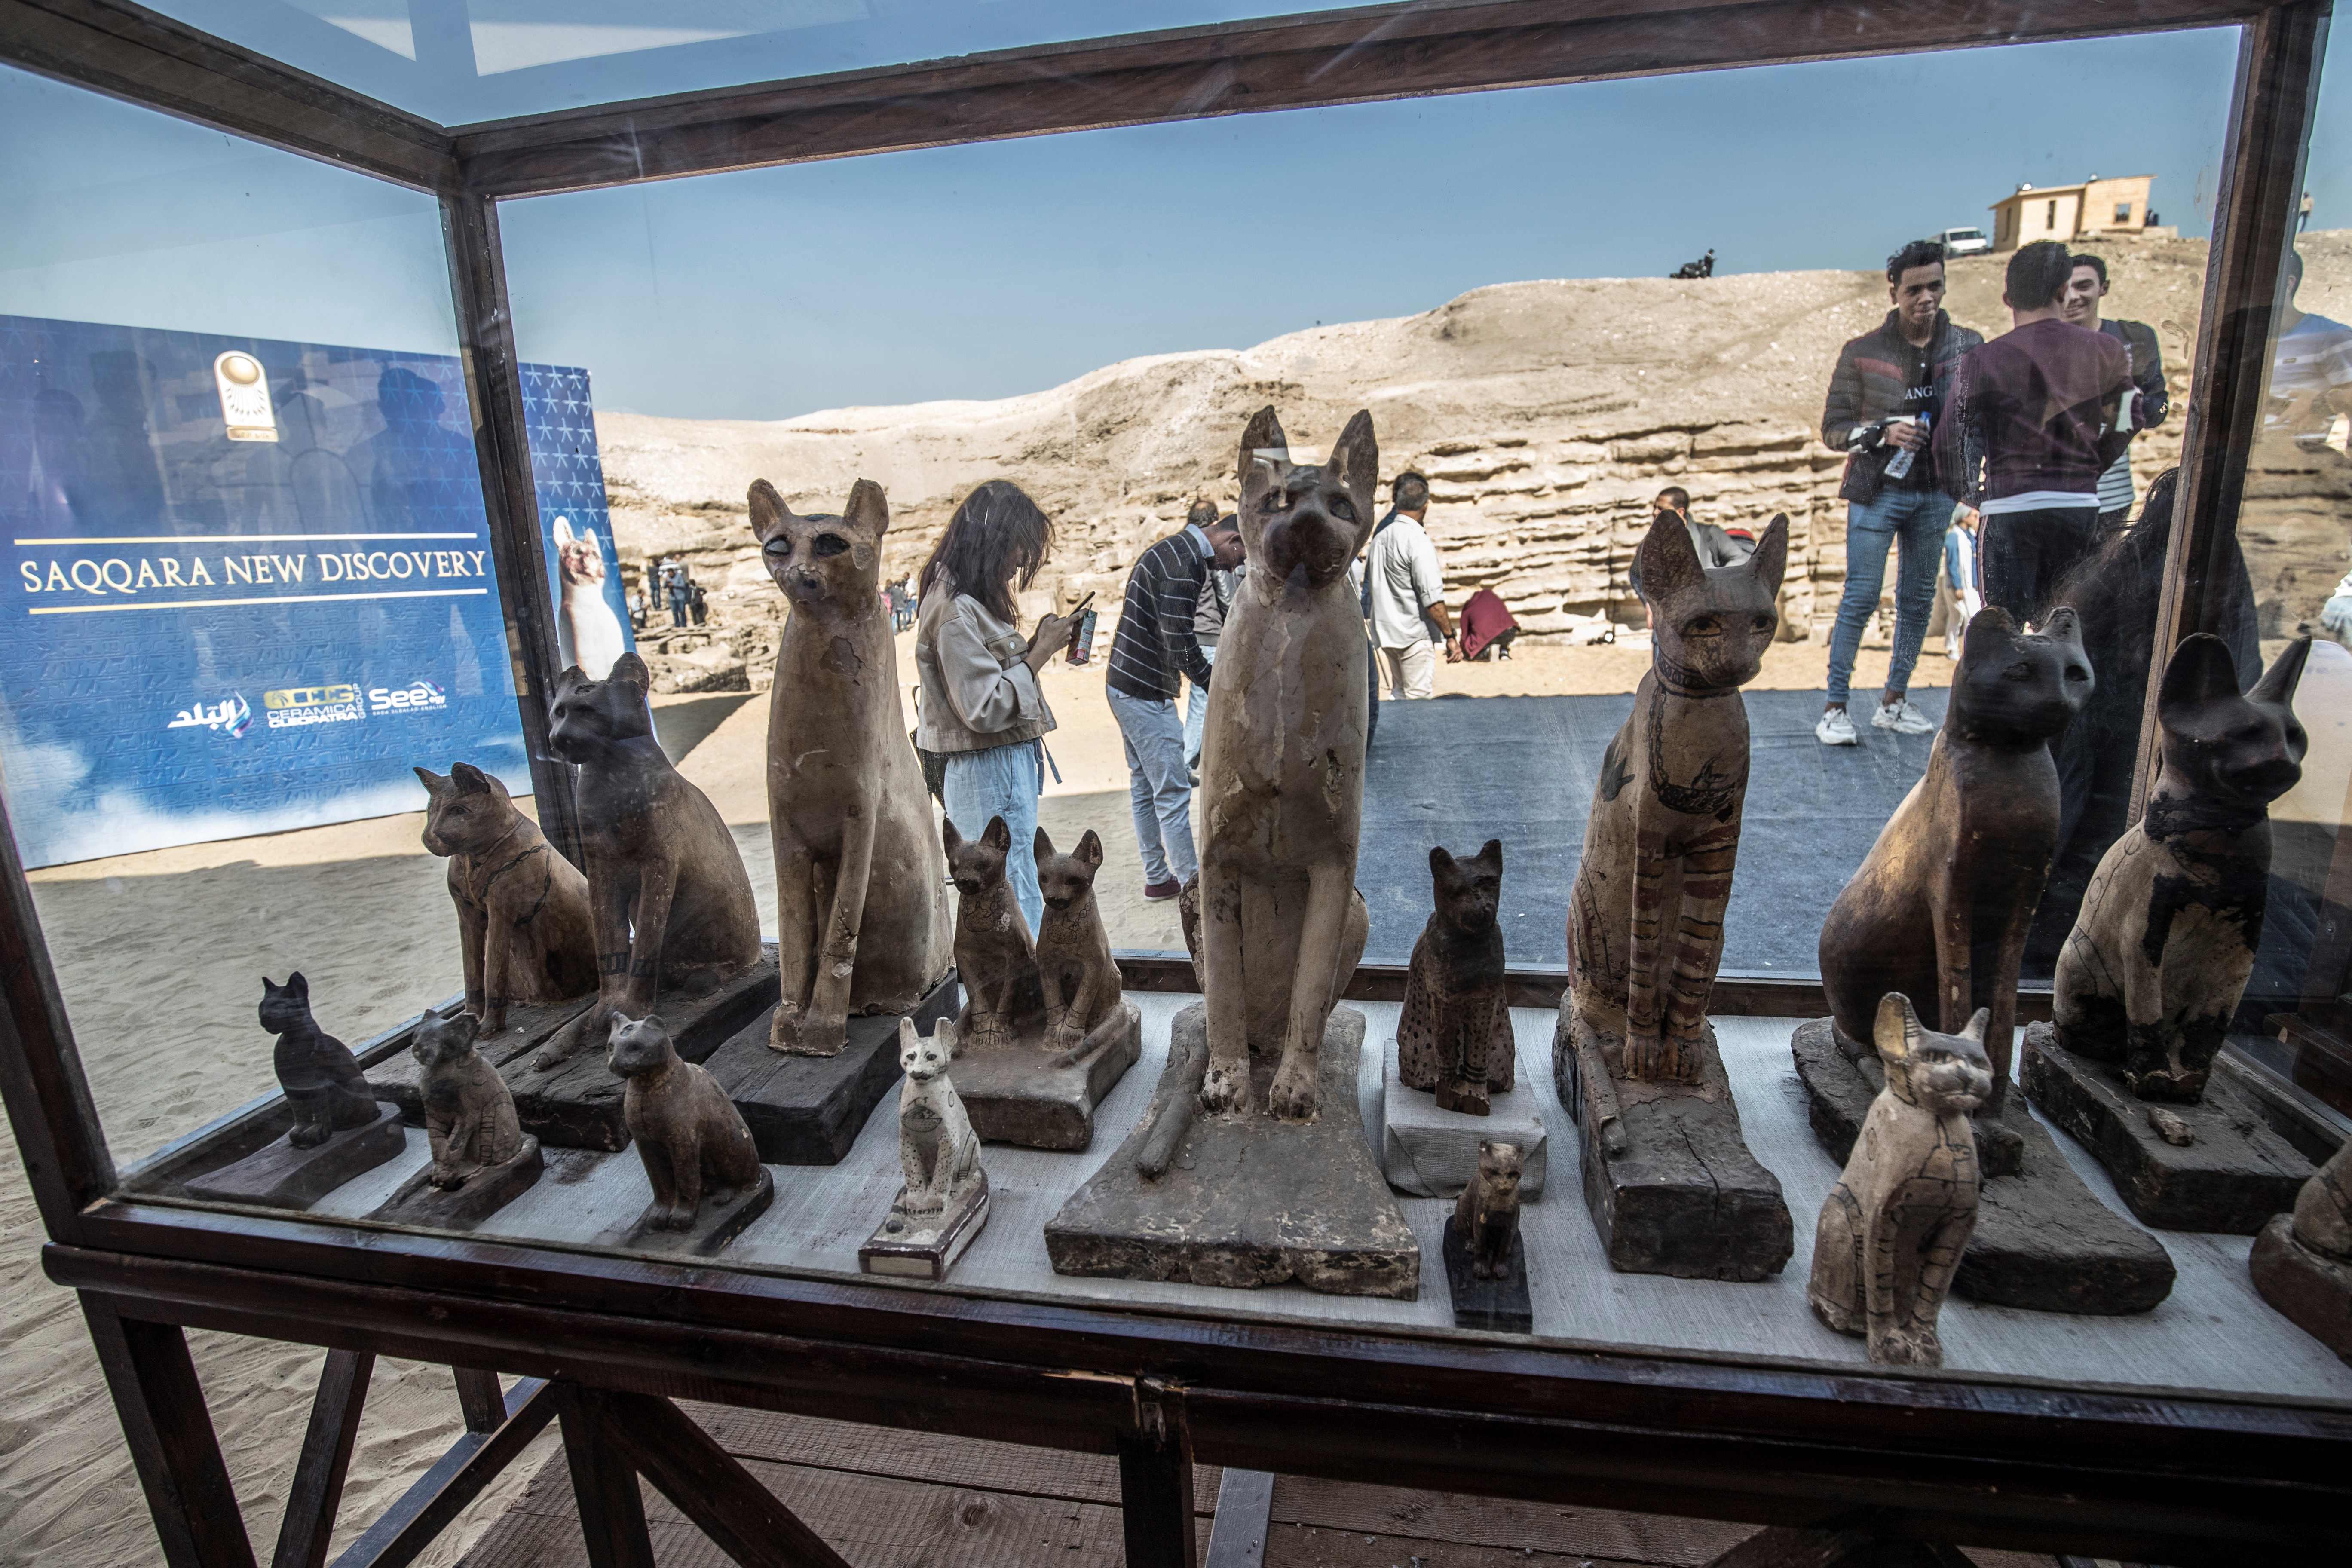 Statues of cats are displayed after the announcement of a new discovery carried out by an Egyptian archaeological team in Giza's Saqqara necropolis, south of the capital Cairo, on November 23, 2019. - Egypt today unveiled a cache of 75 wooden and bronze statues and five lion cub mummies decorated with hieroglyphics at the Saqqara necropolis near the Giza pyramids in Cairo. Mummified cats, cobras, crocodiles and scarabs were also unearthed among the well-preserved mummies and other objects discovered recently. (Photo by Khaled DESOUKI / AFP)